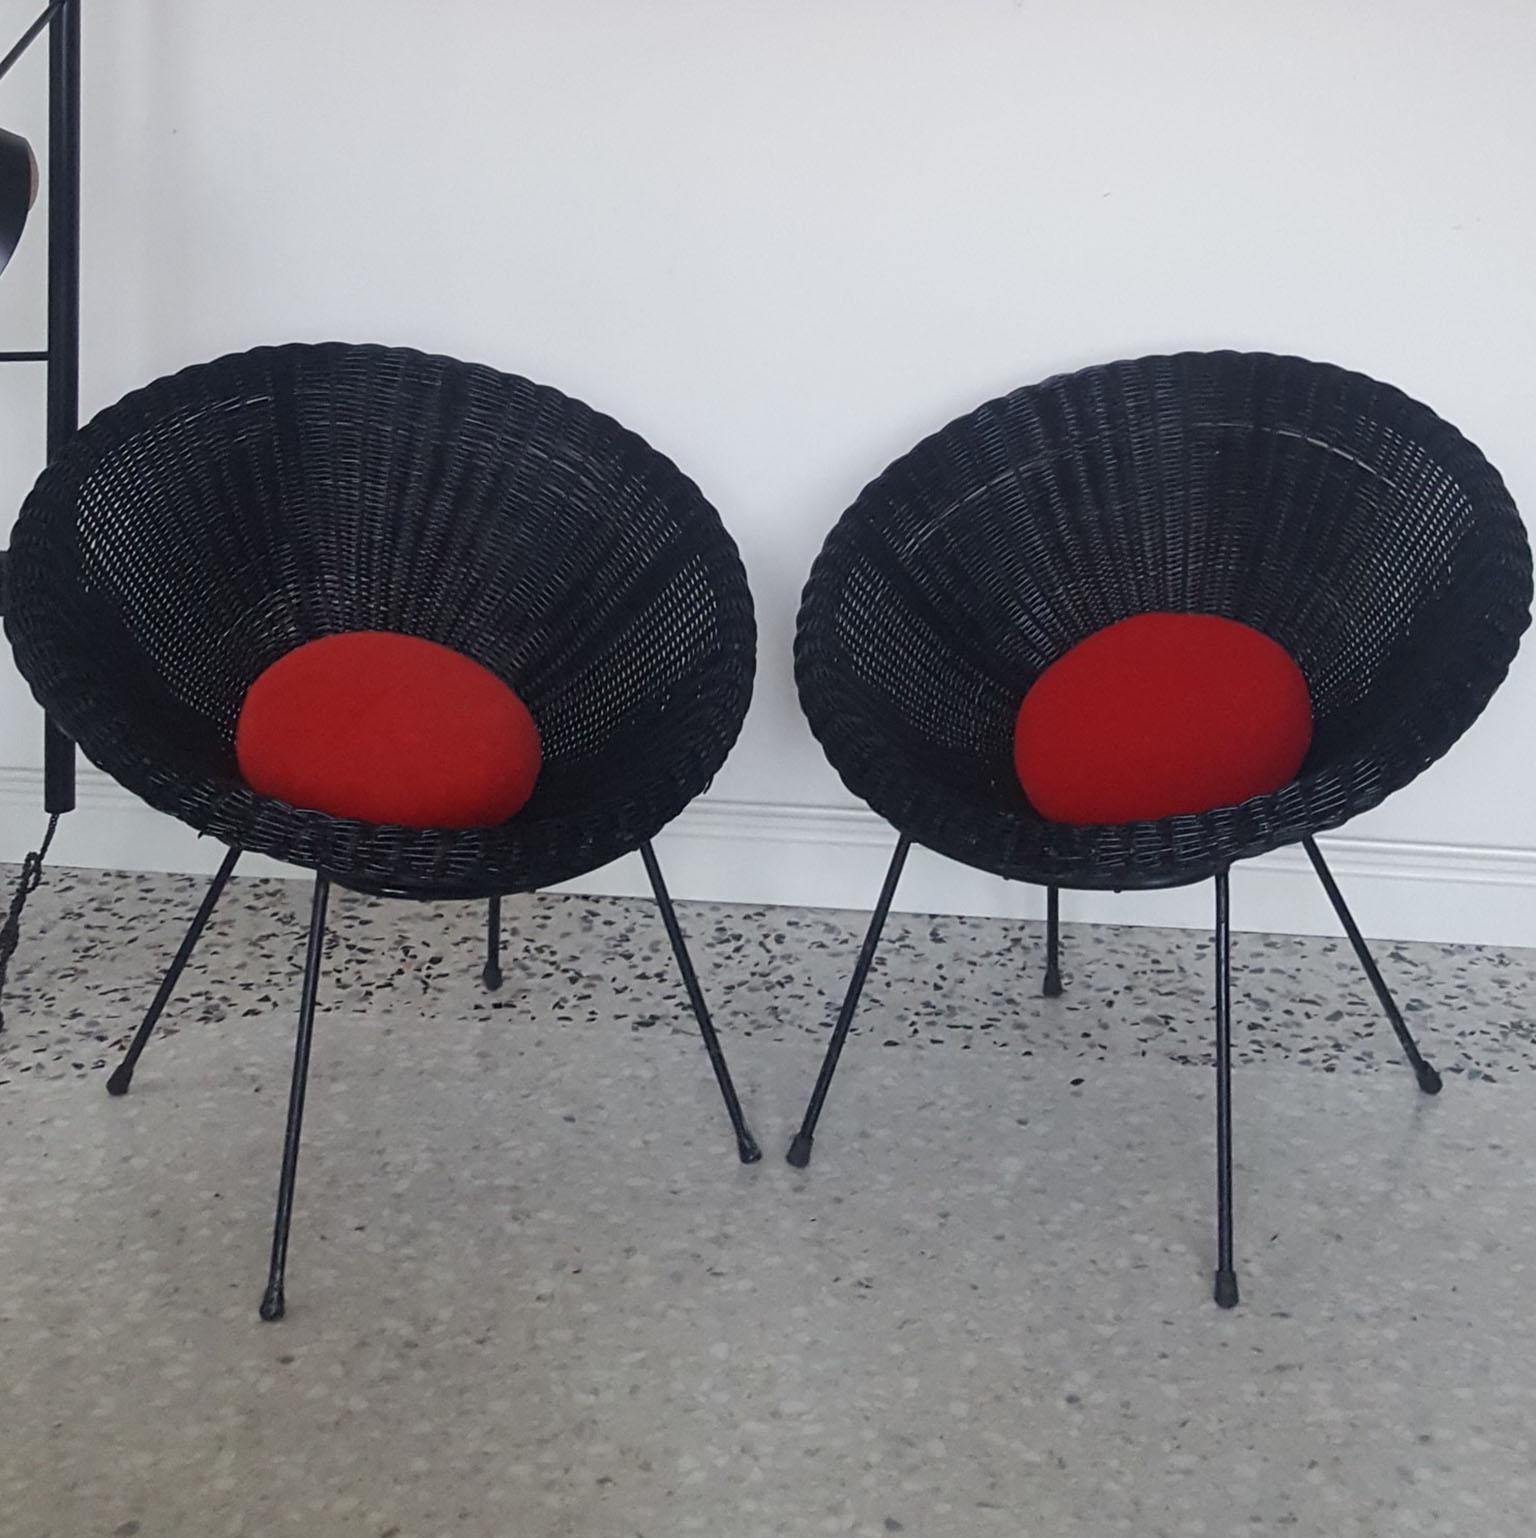 Mid-Century Modern Italian Black Wicker Round Armchairs, Made in Milano, 1950s For Sale 10